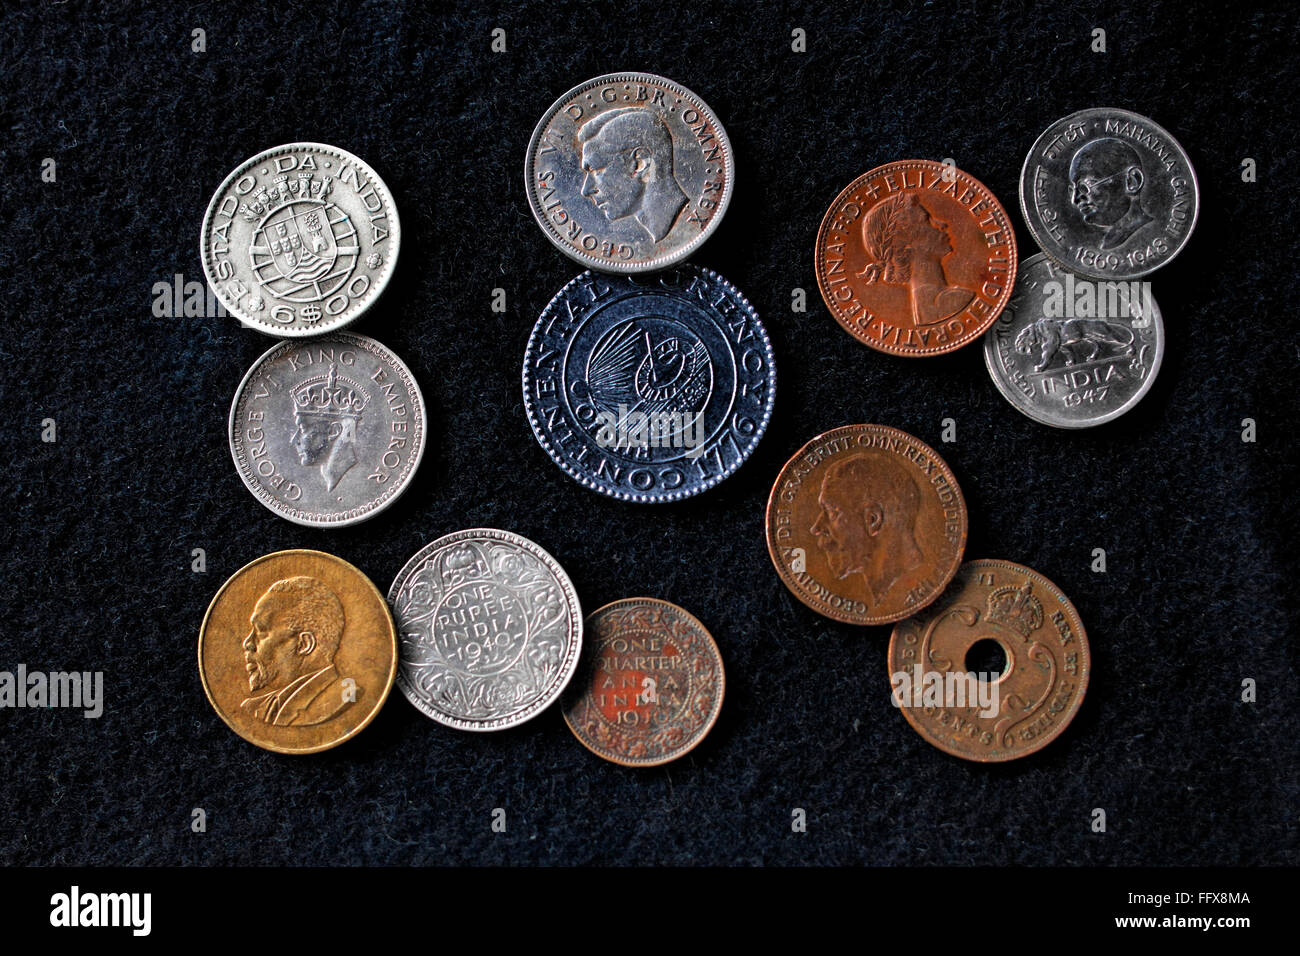 Old coins, Indian coins, round coins, metal coins, British coins, silver coins, brass coins, bronze coins, coin with hole, black background, India Stock Photo